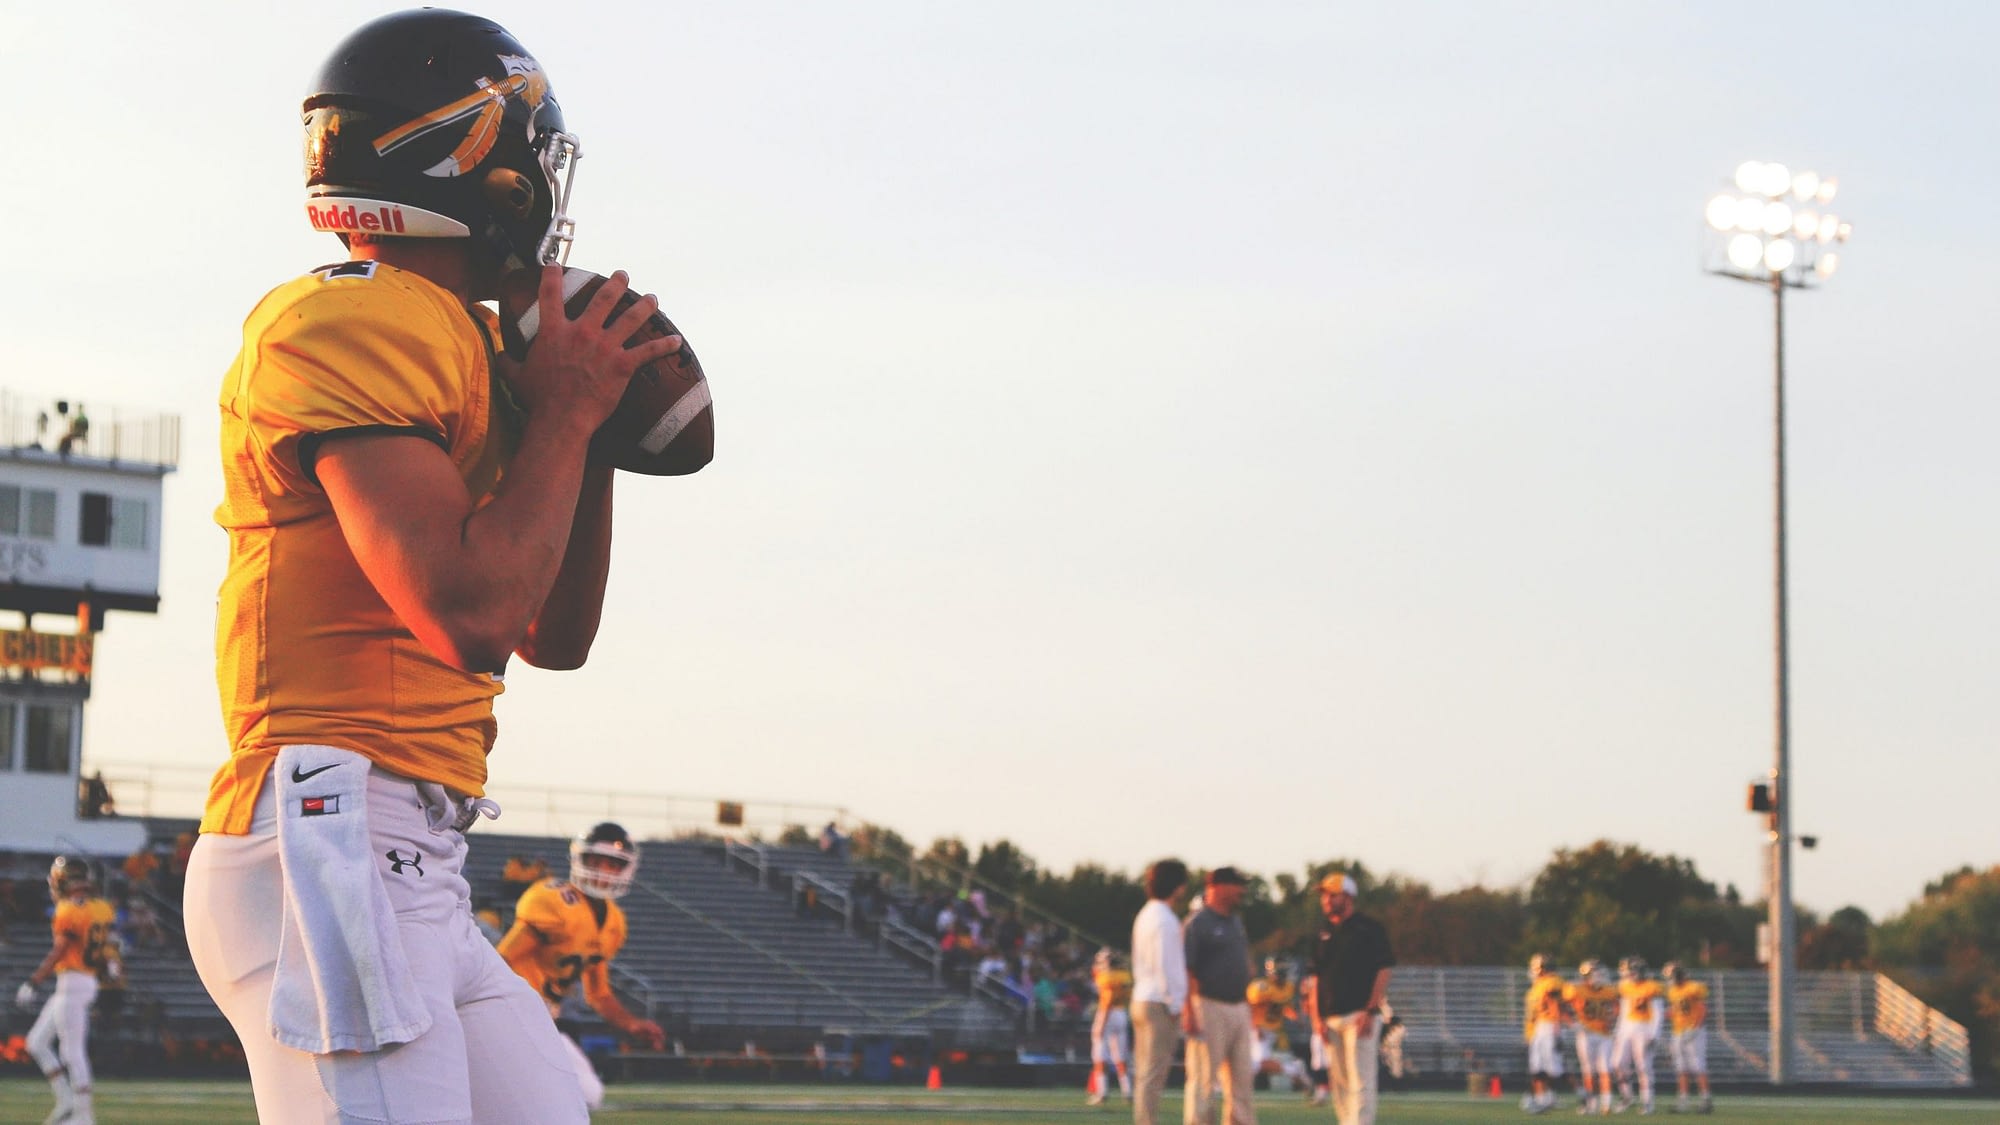 Image: A high school student preparing to throw a football to his teammates. A metaphor for purpose driven goals.